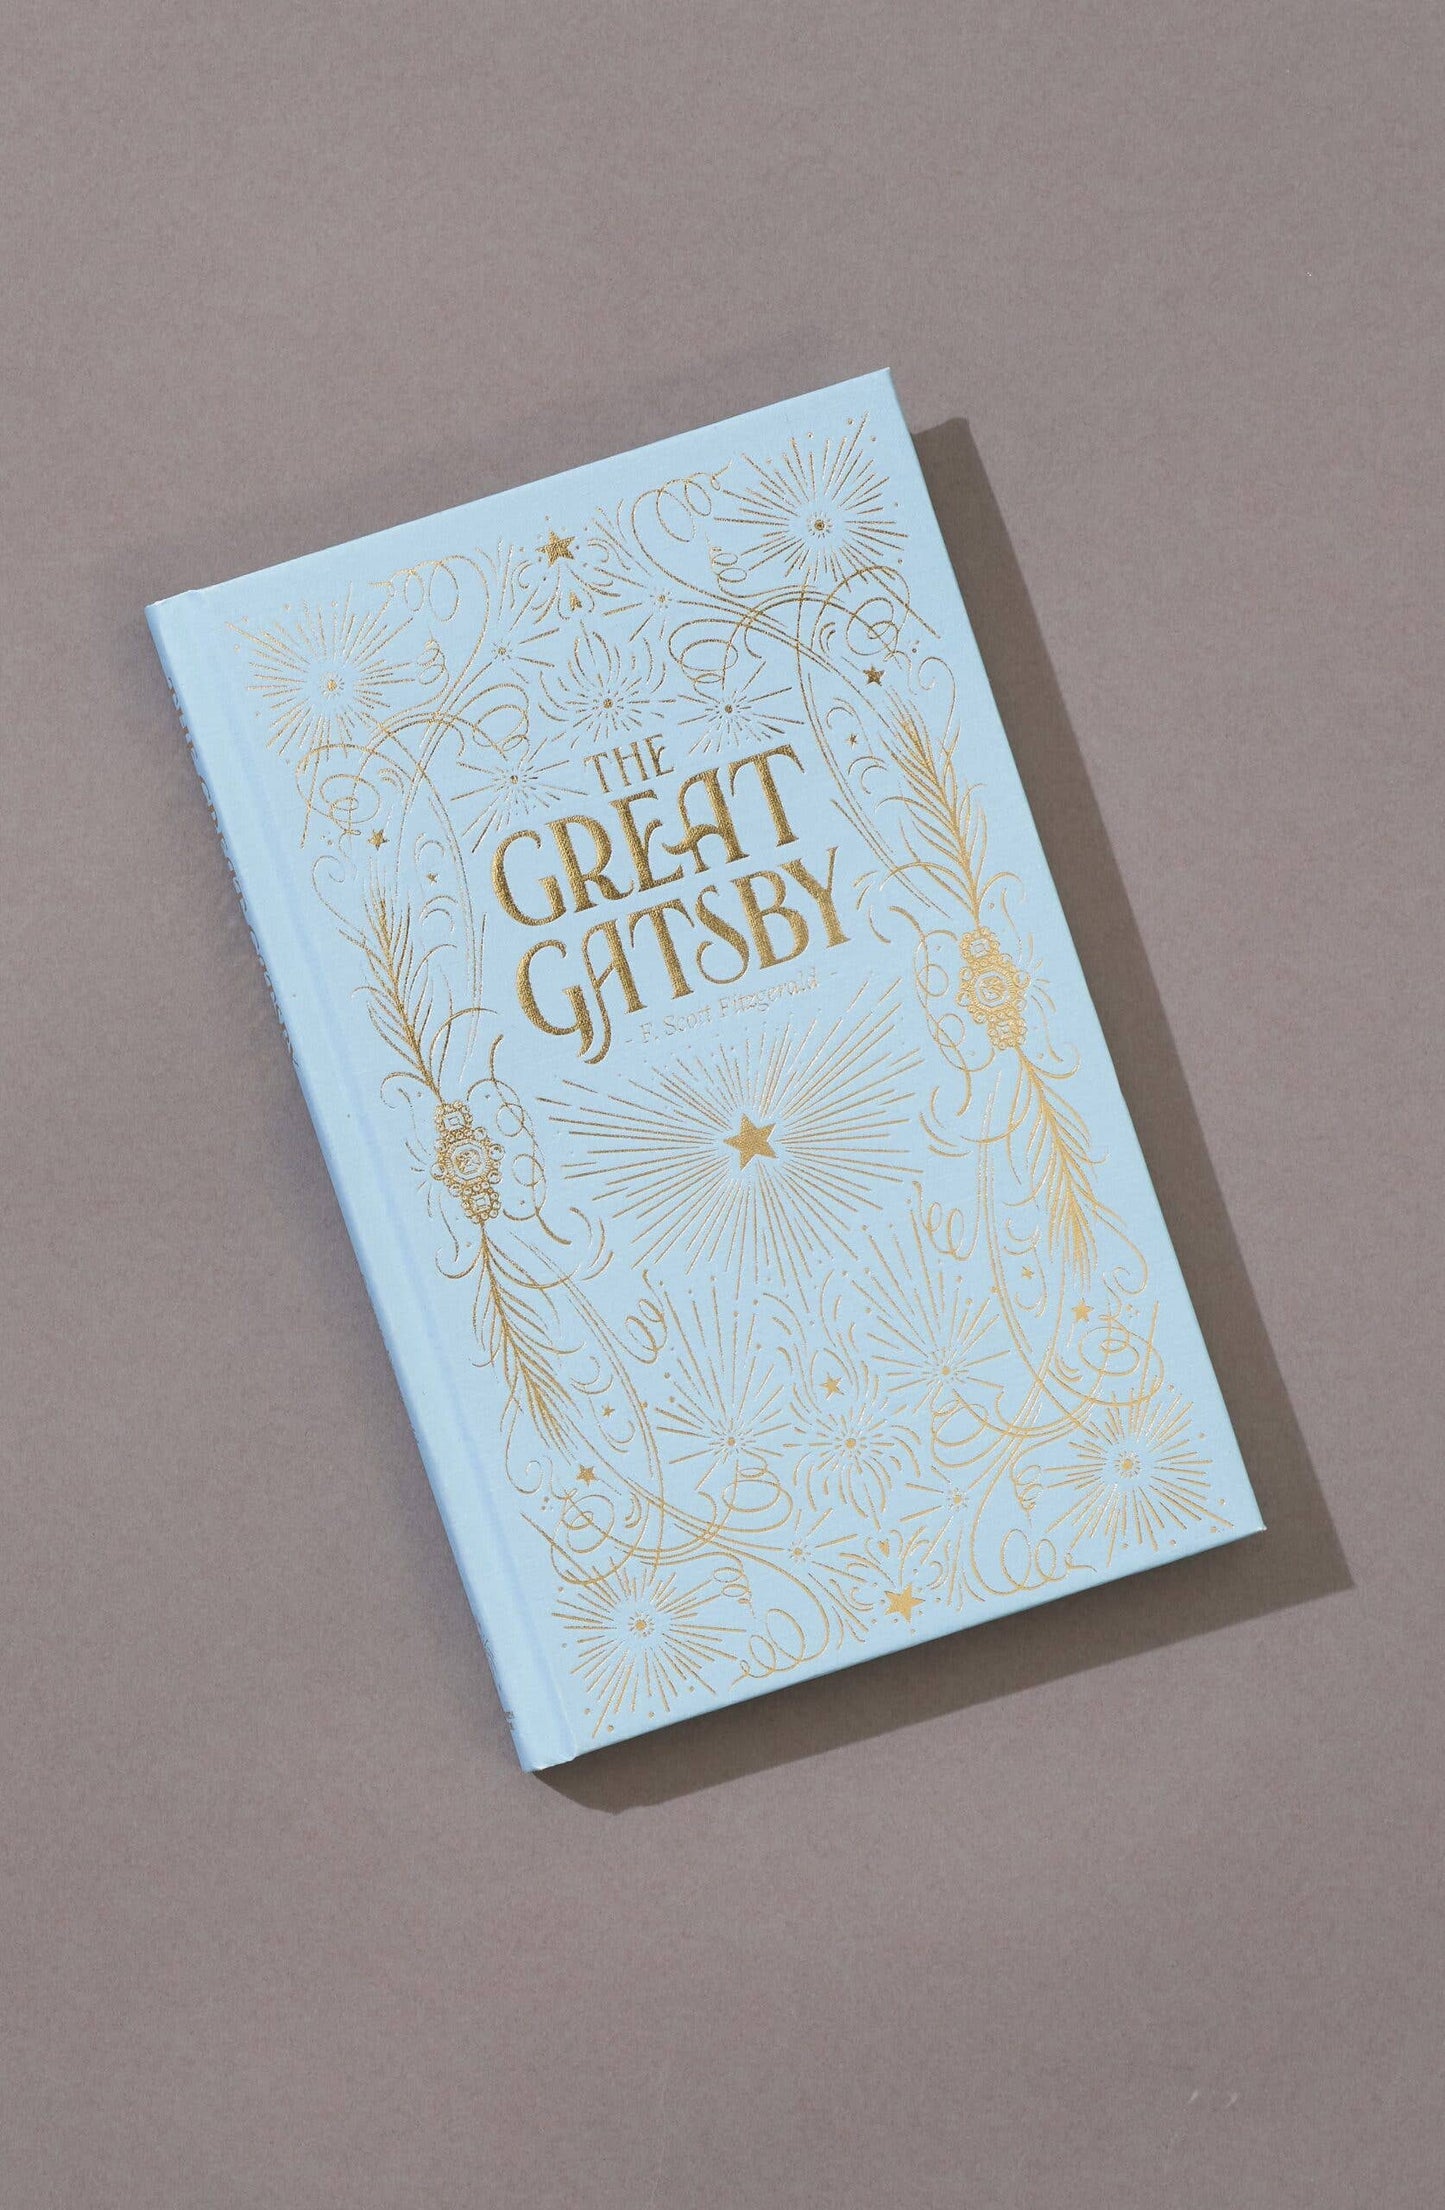 The Great Gatsby  by  F. Scott Fitzgerald | Luxe Edition | Hardcover